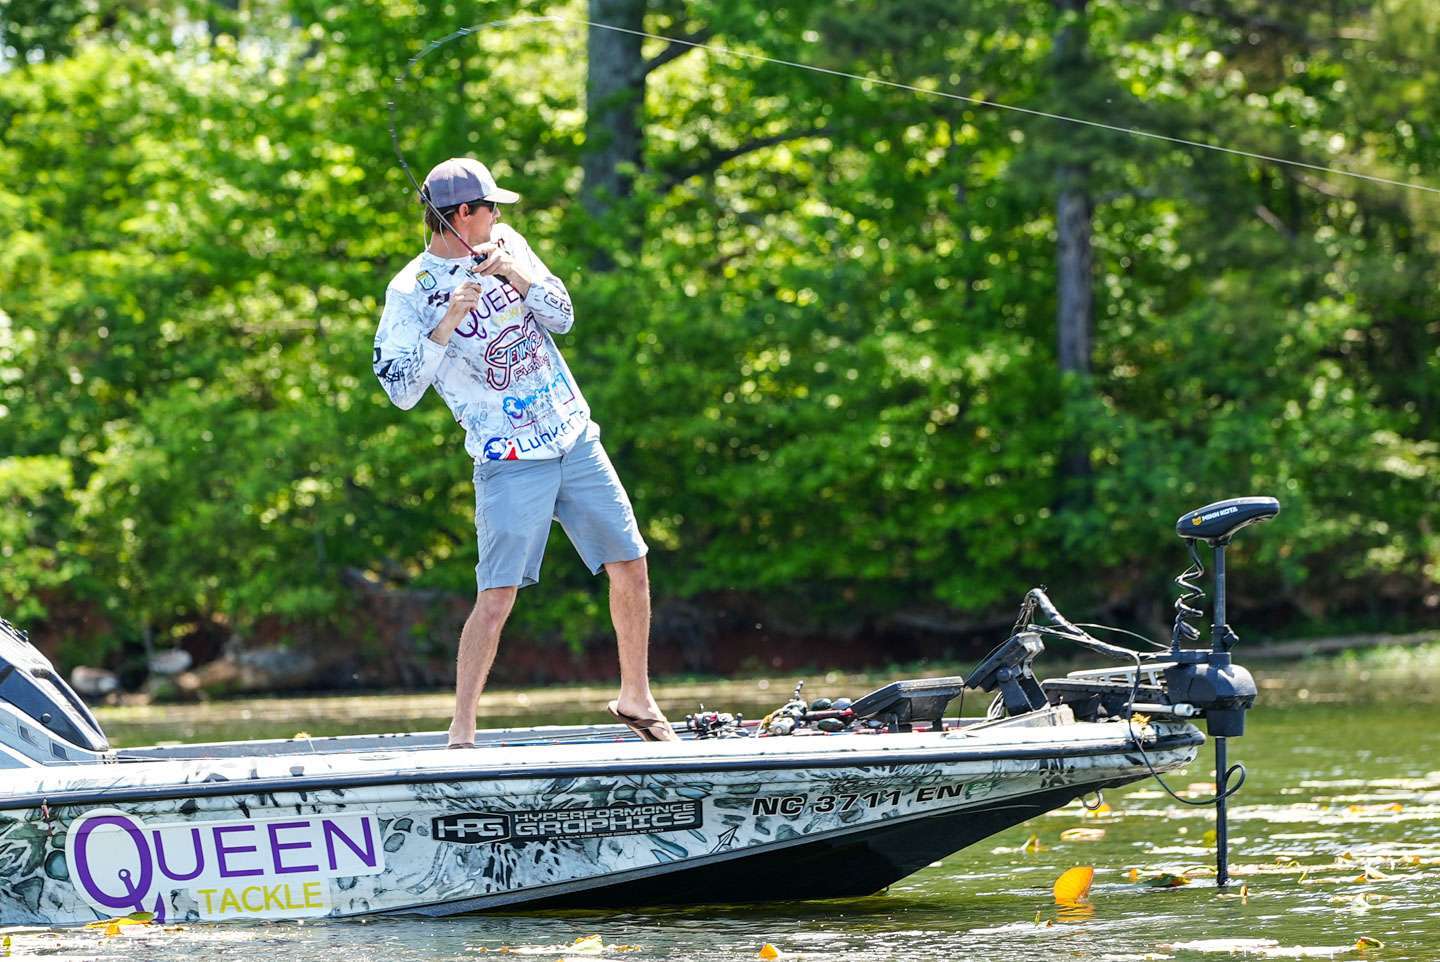 

<h4>KJ Queen (50-1)</h4>
<p><b>Catawba, North Carolina</b><br />
Queen is another Classic rookie who qualified by finishing in 34th place in the 2021 AOY standings. He finished 63rd in his only other trip to Hartwell with B.A.S.S., the 2020 Eastern Open.<br />
” class=”wp-image-567969″ width=”1440″ height=”962″/><figcaption>
<h4>KJ Queen (50-1)</h4>
<p><b>Catawba, North Carolina</b><br />
Queen is another Classic rookie who qualified by finishing in 34th place in the 2021 AOY standings. He finished 63rd in his only other trip to Hartwell with B.A.S.S., the 2020 Eastern Open.<br />
</figcaption></figure>
<figure class=